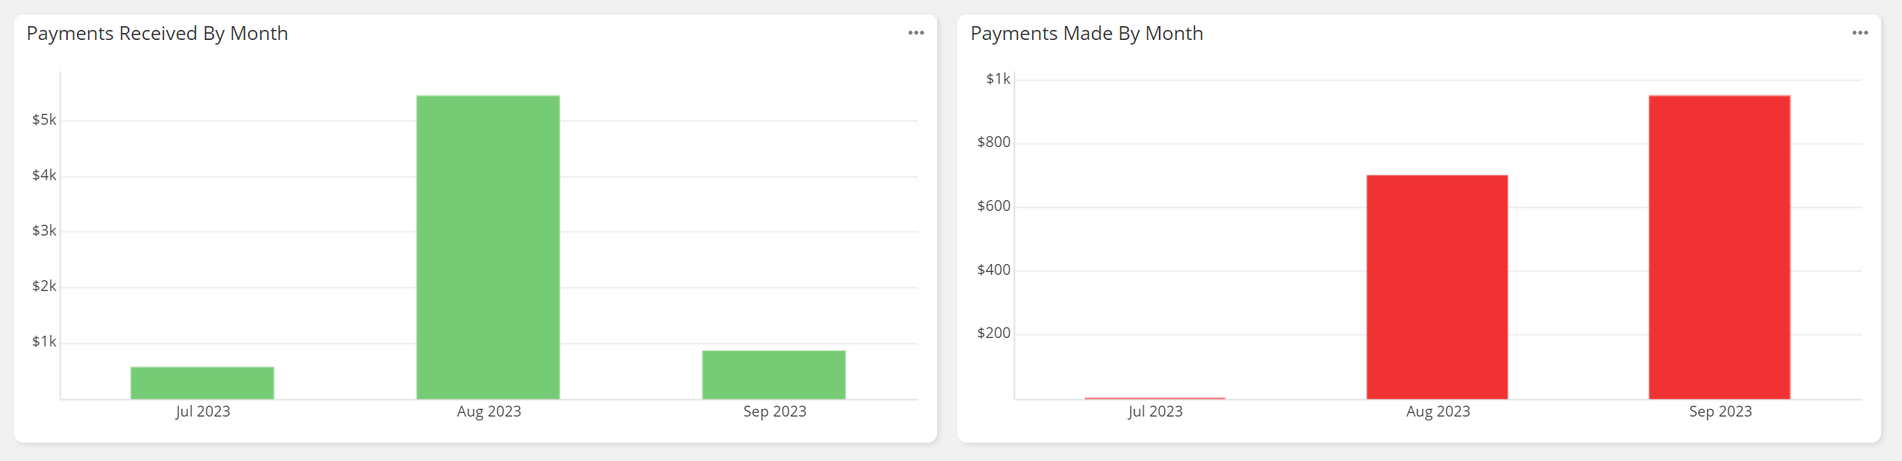 Payments Received & Payments Made By Month